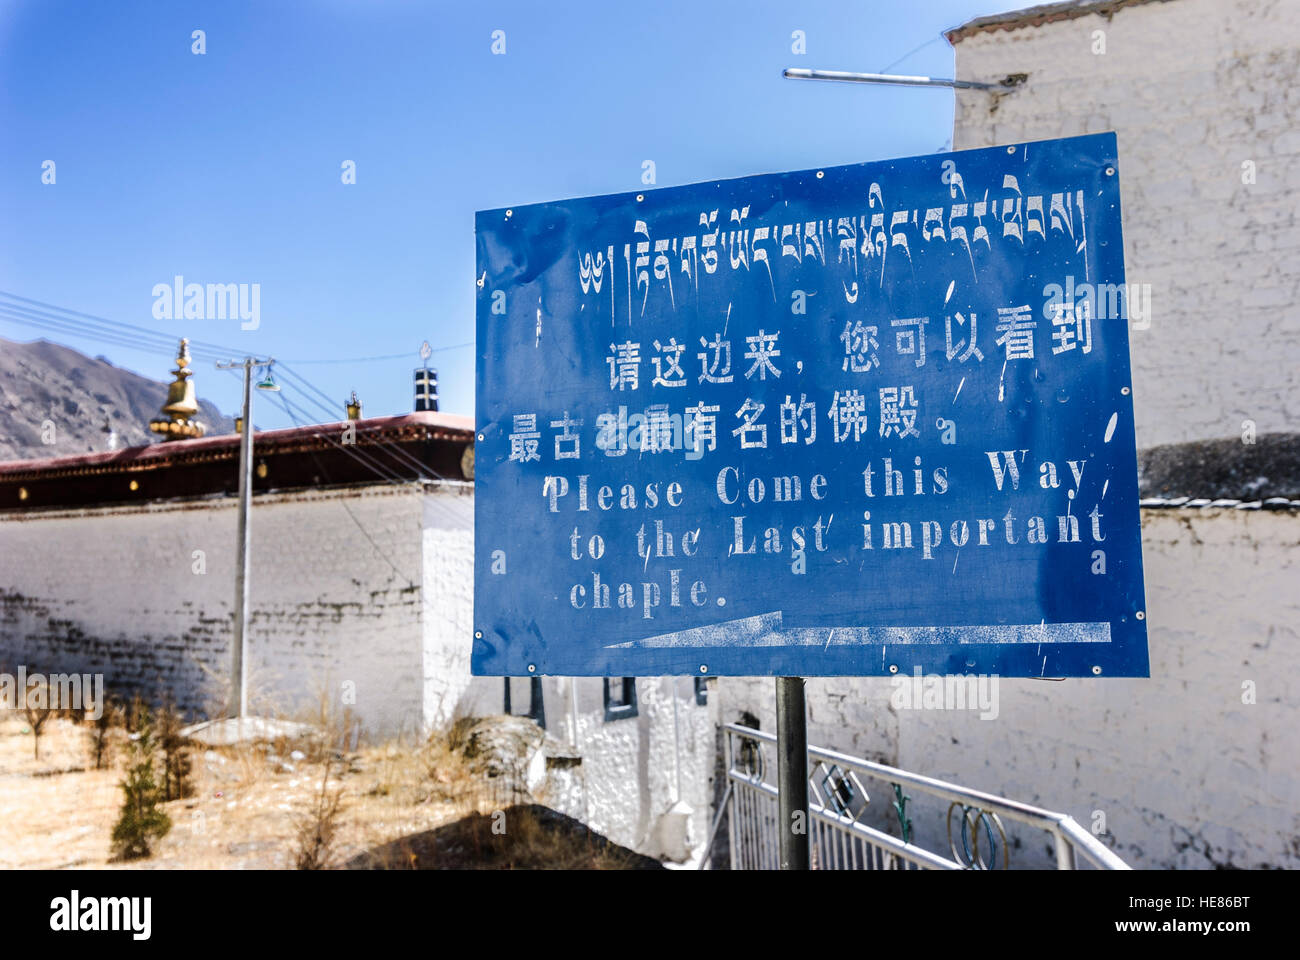 Lhasa: Monastery Drepung; 'The Last important chapel': Comforting signpost after many chapels before, Tibet, China Stock Photo